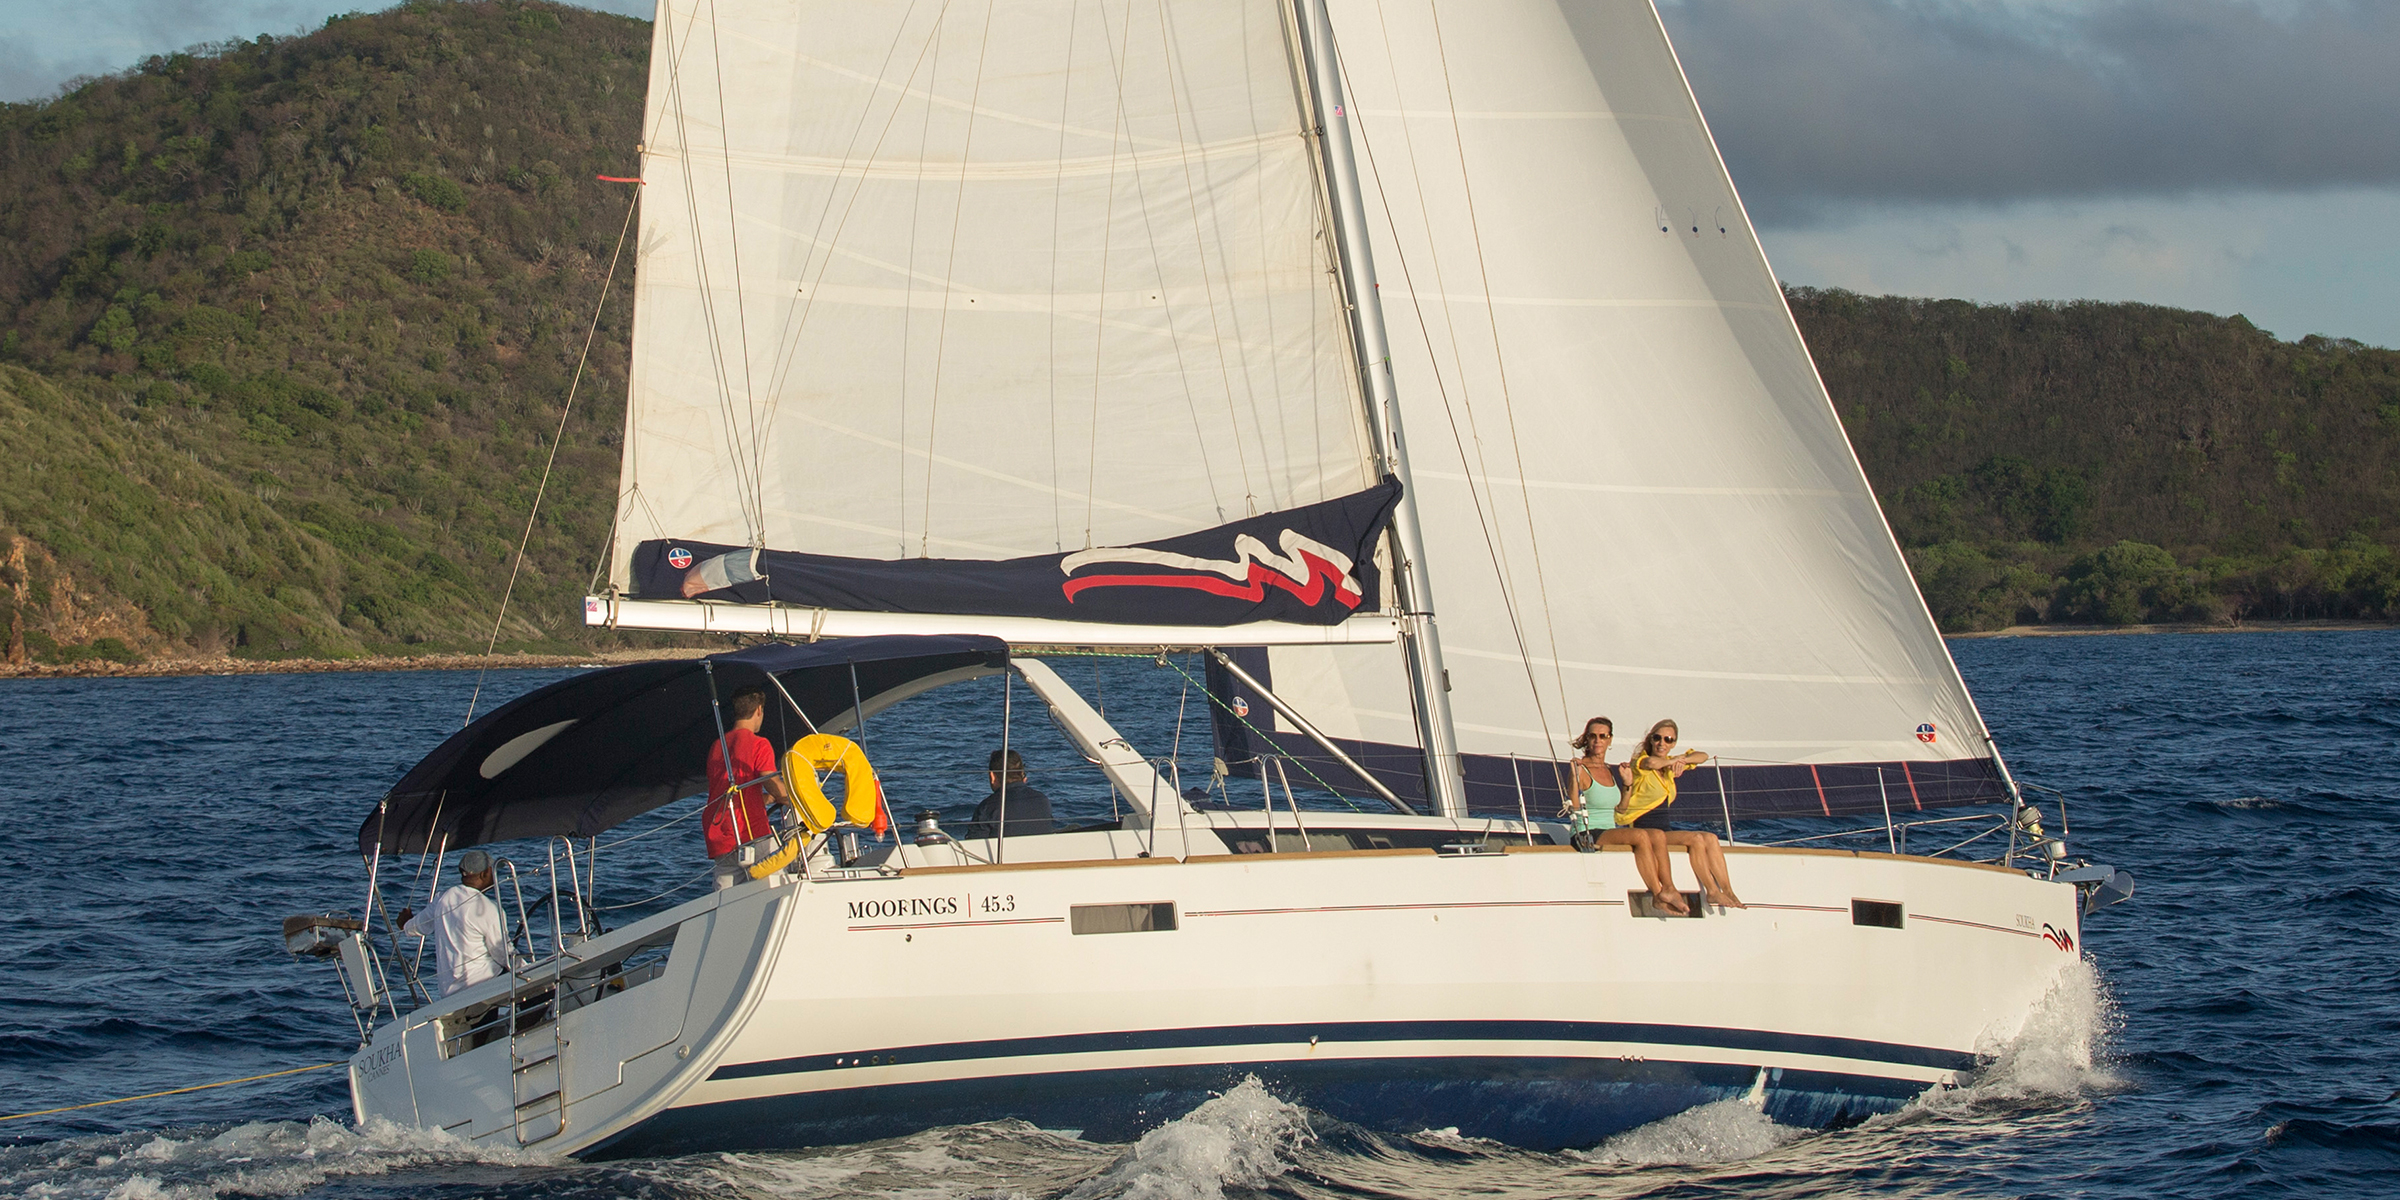 Oceanis 45 - Yacht Charter Saint Lucia & Boat hire in St. Lucia Gros Islet Rodney Bay Marina 5